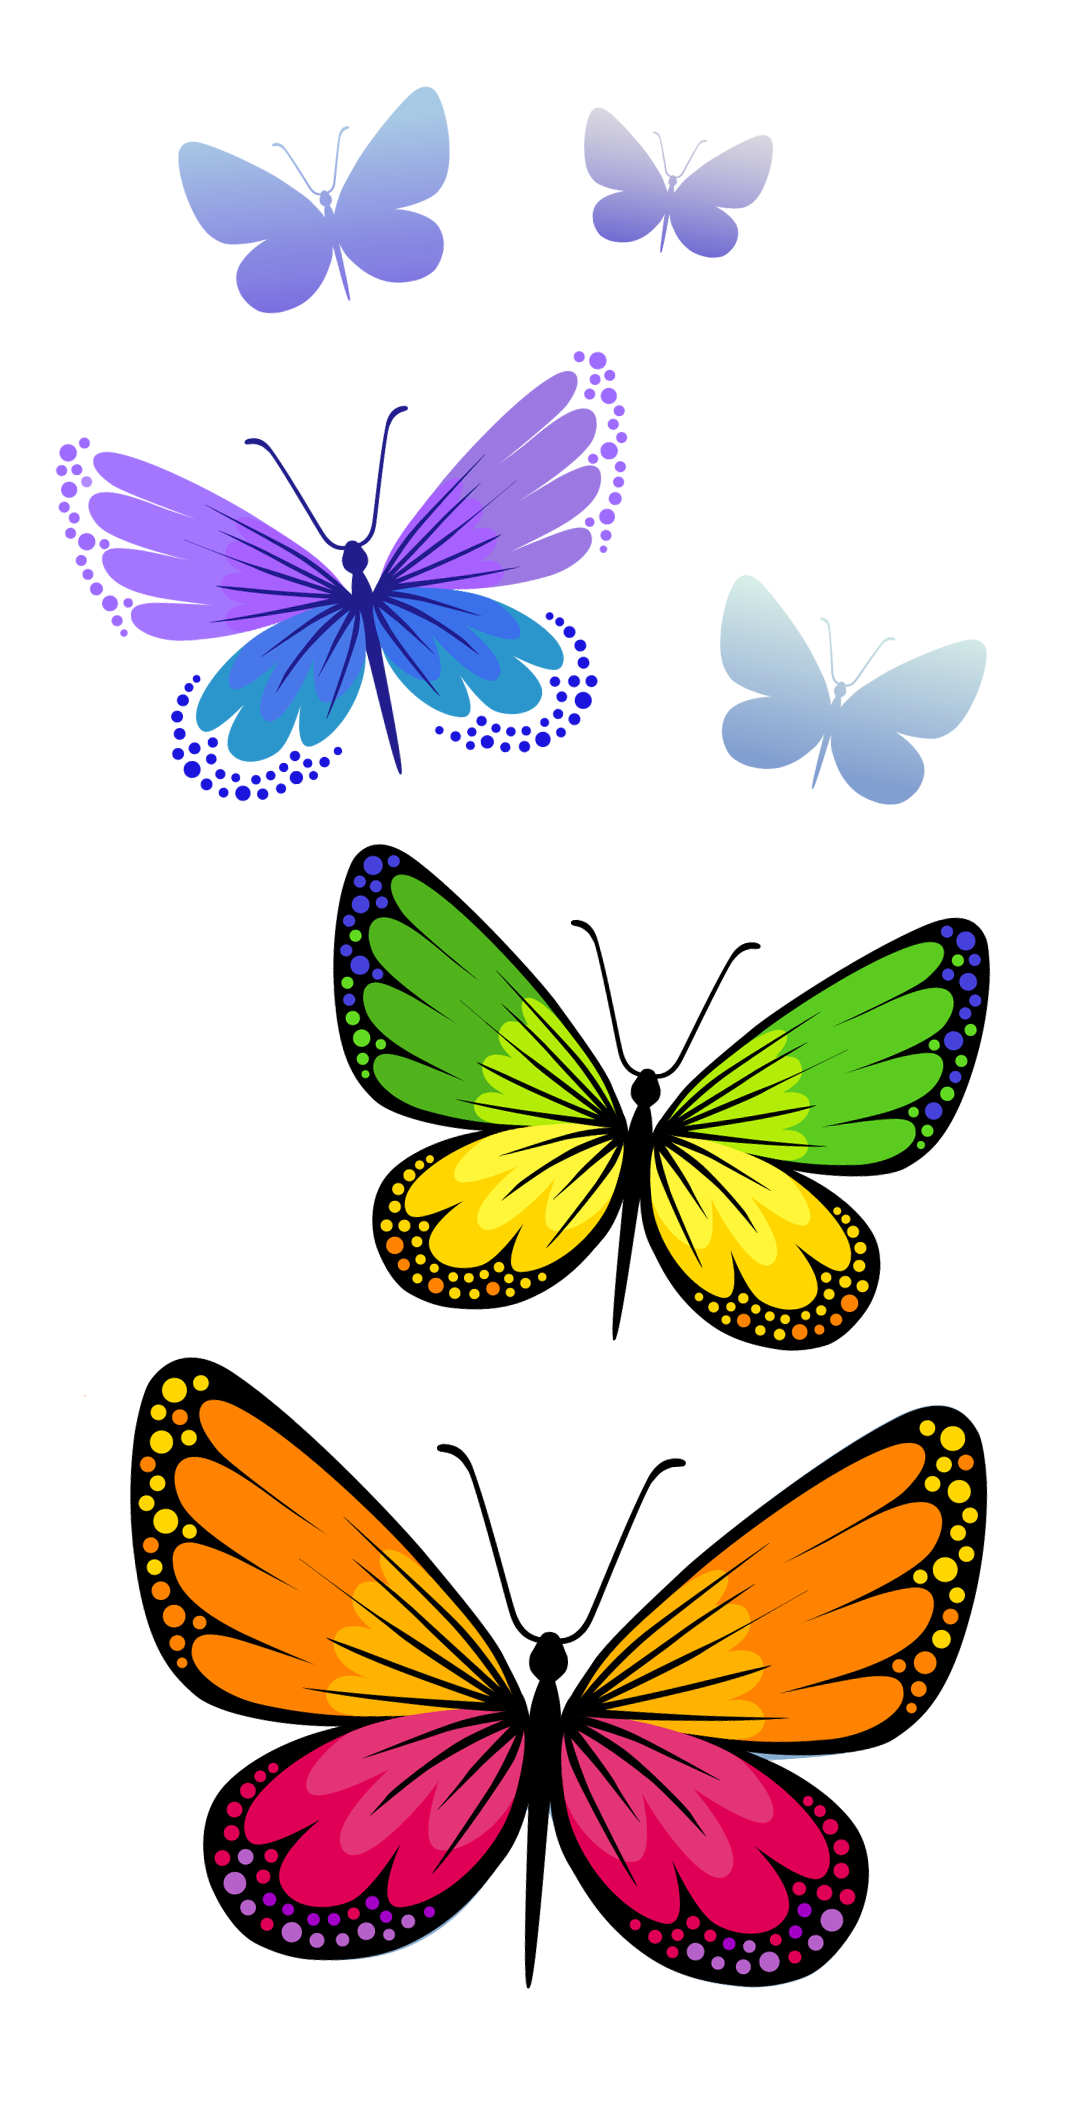 Butterflies composition png image. Dragonfly clipart real